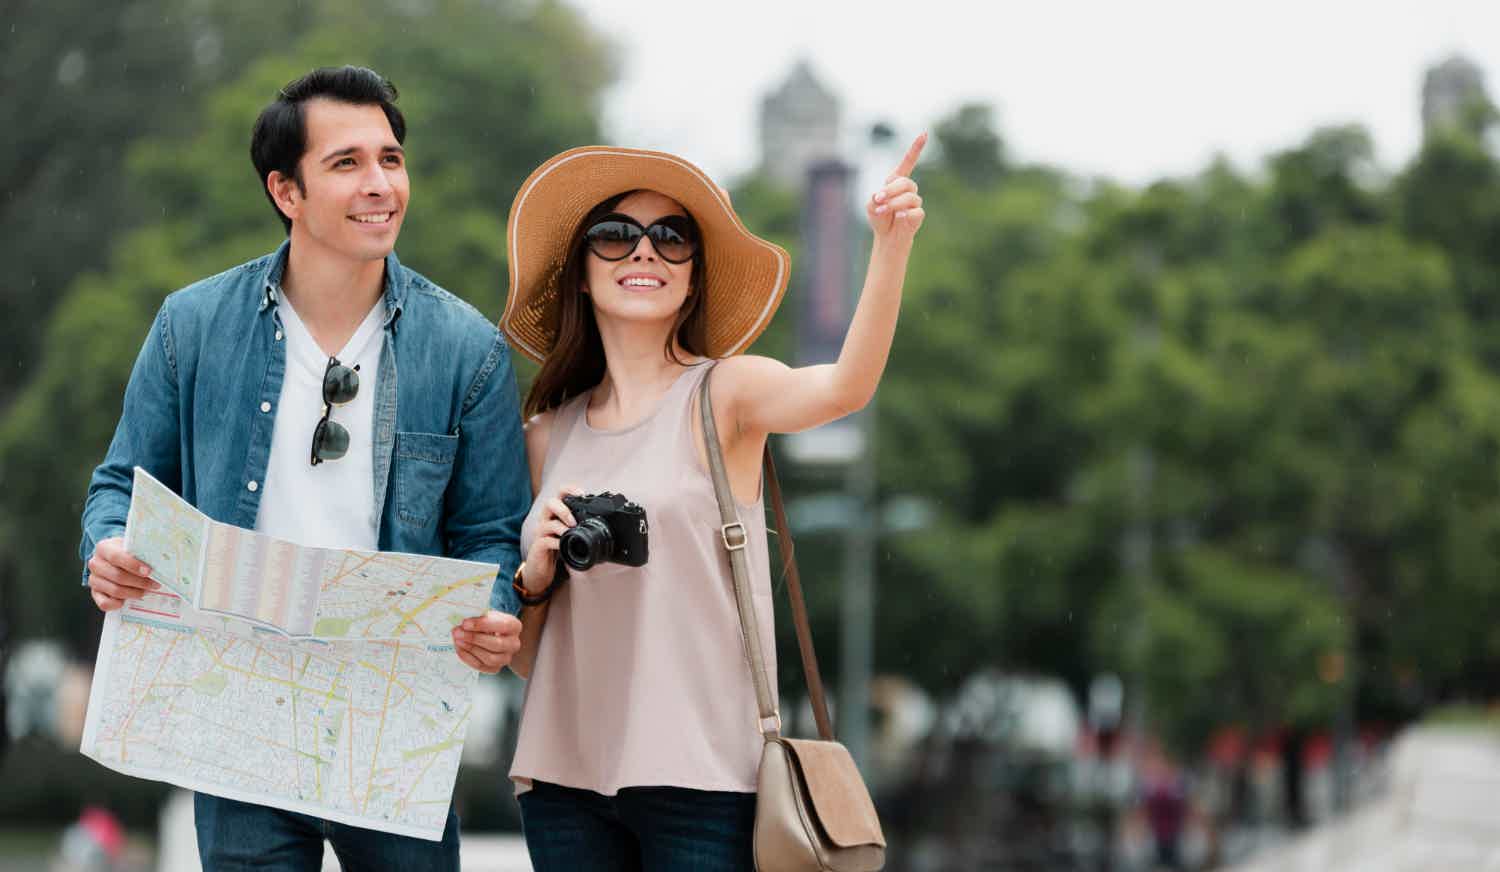 You'll earn miles with every purchase to enhance your travel experience. Source: Freepik.